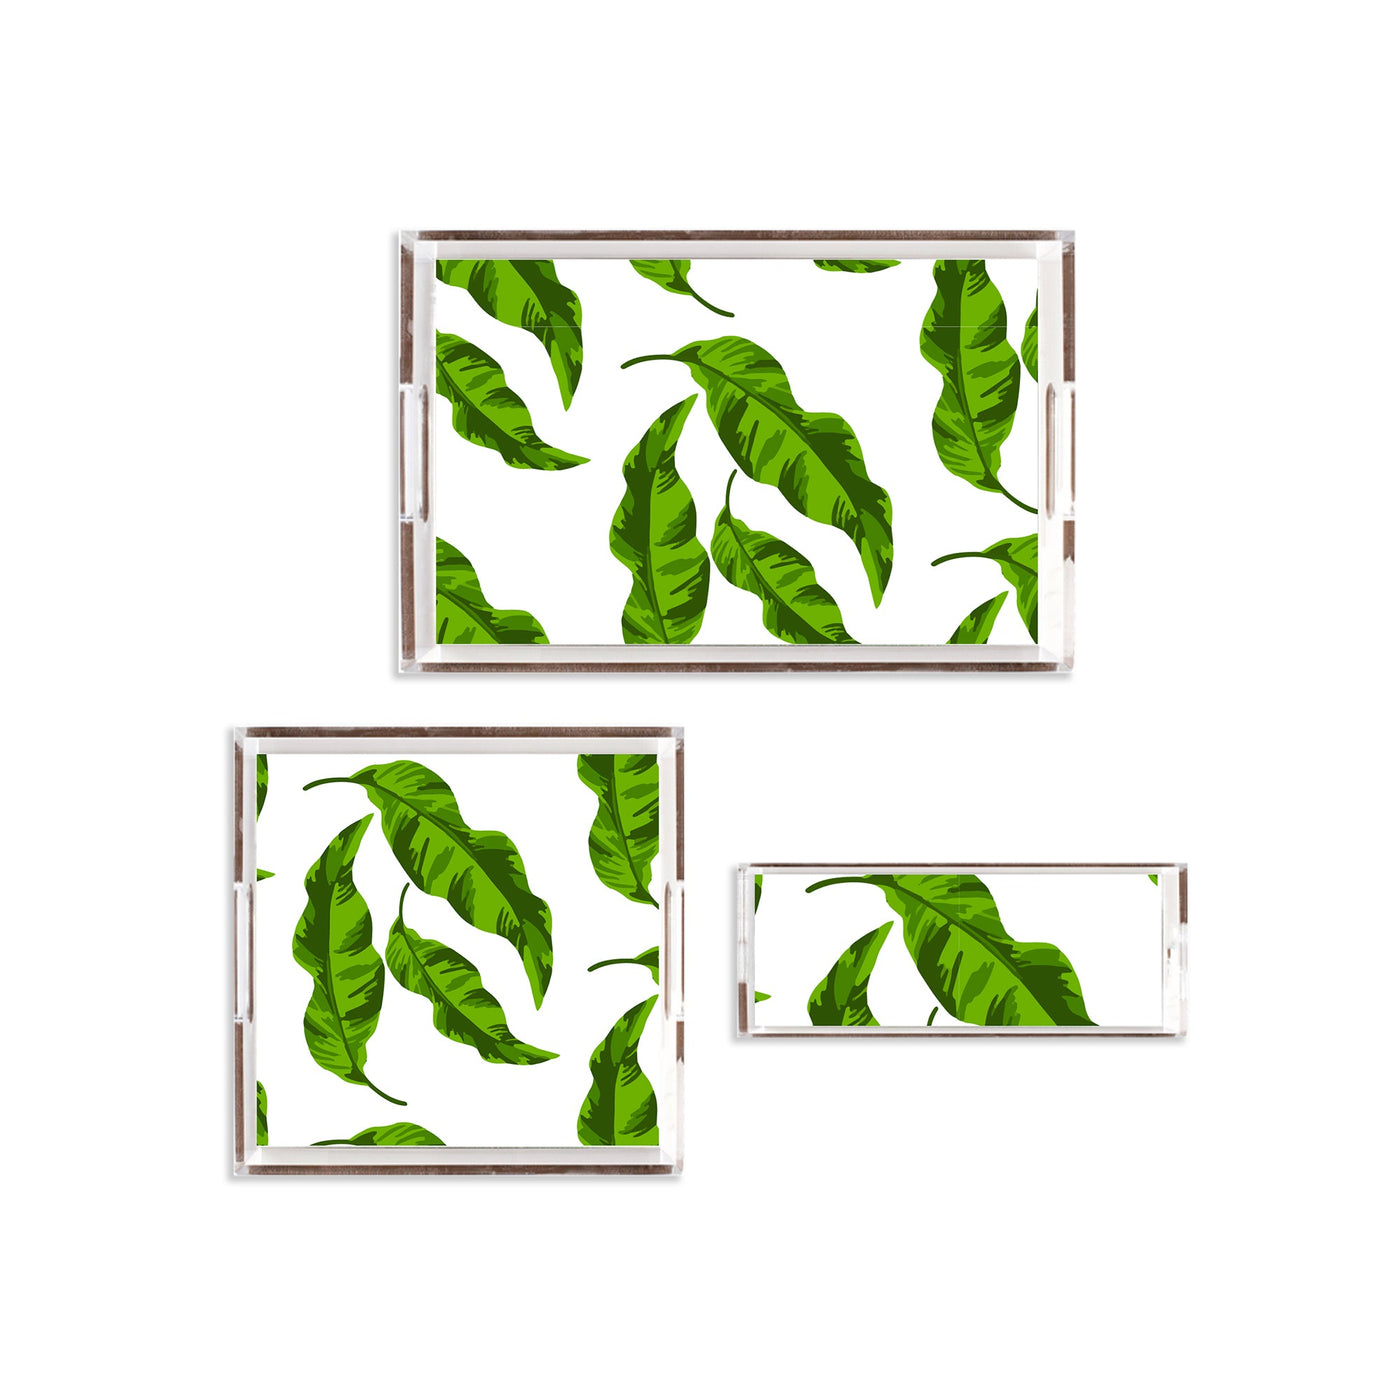 Lucite Trays Banana Leaves Lucite Tray Katie Kime